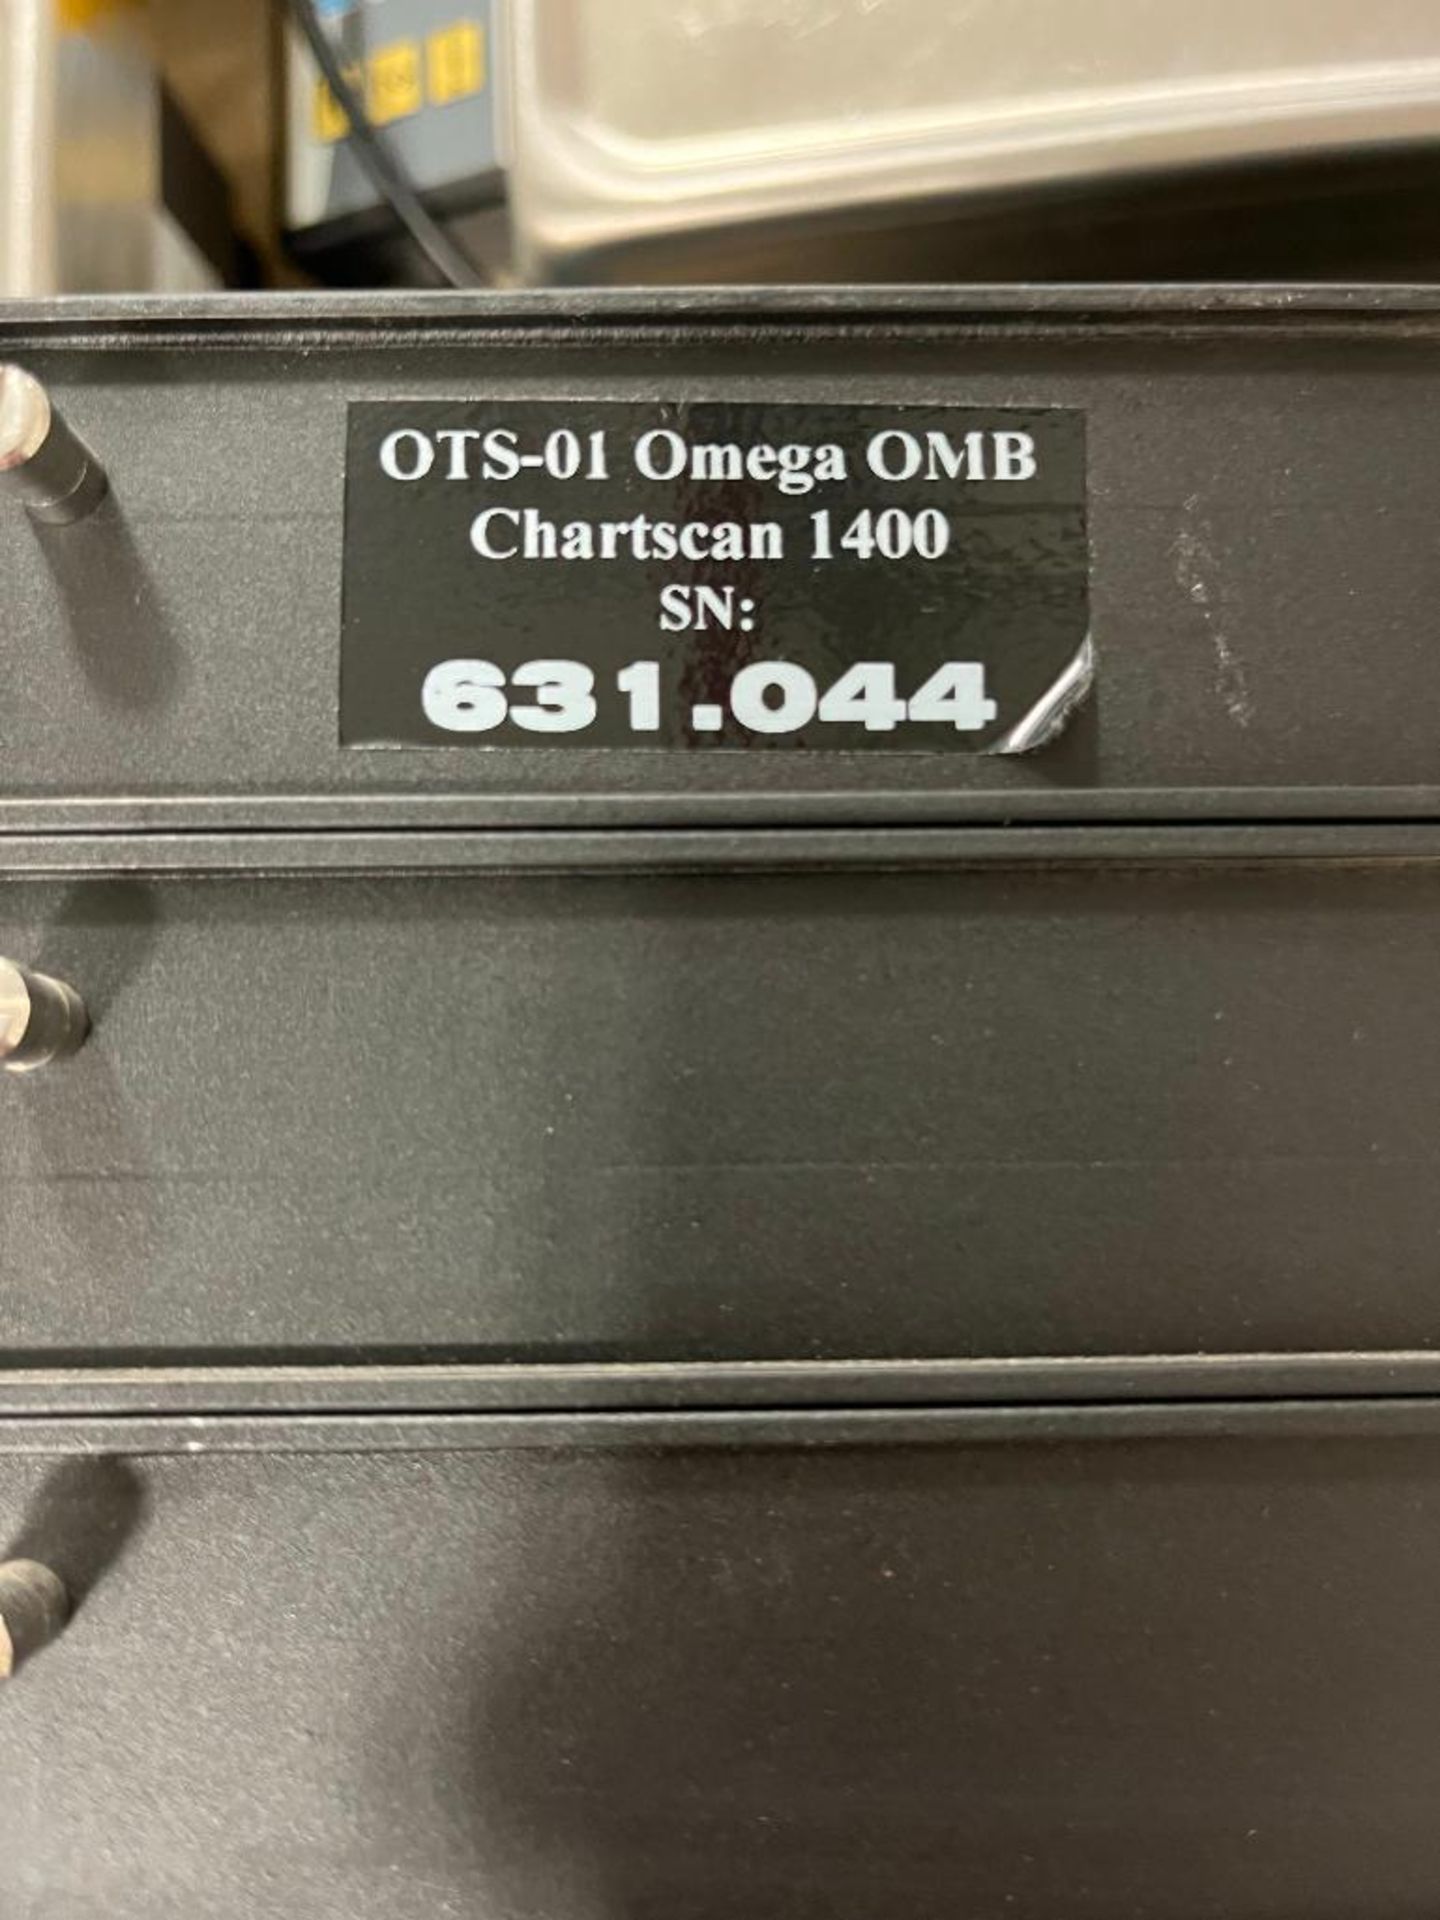 Omega Omb-Chartscan-1400 Portable Data Recorder, S/N 631.044, 16-Channel - Image 5 of 5